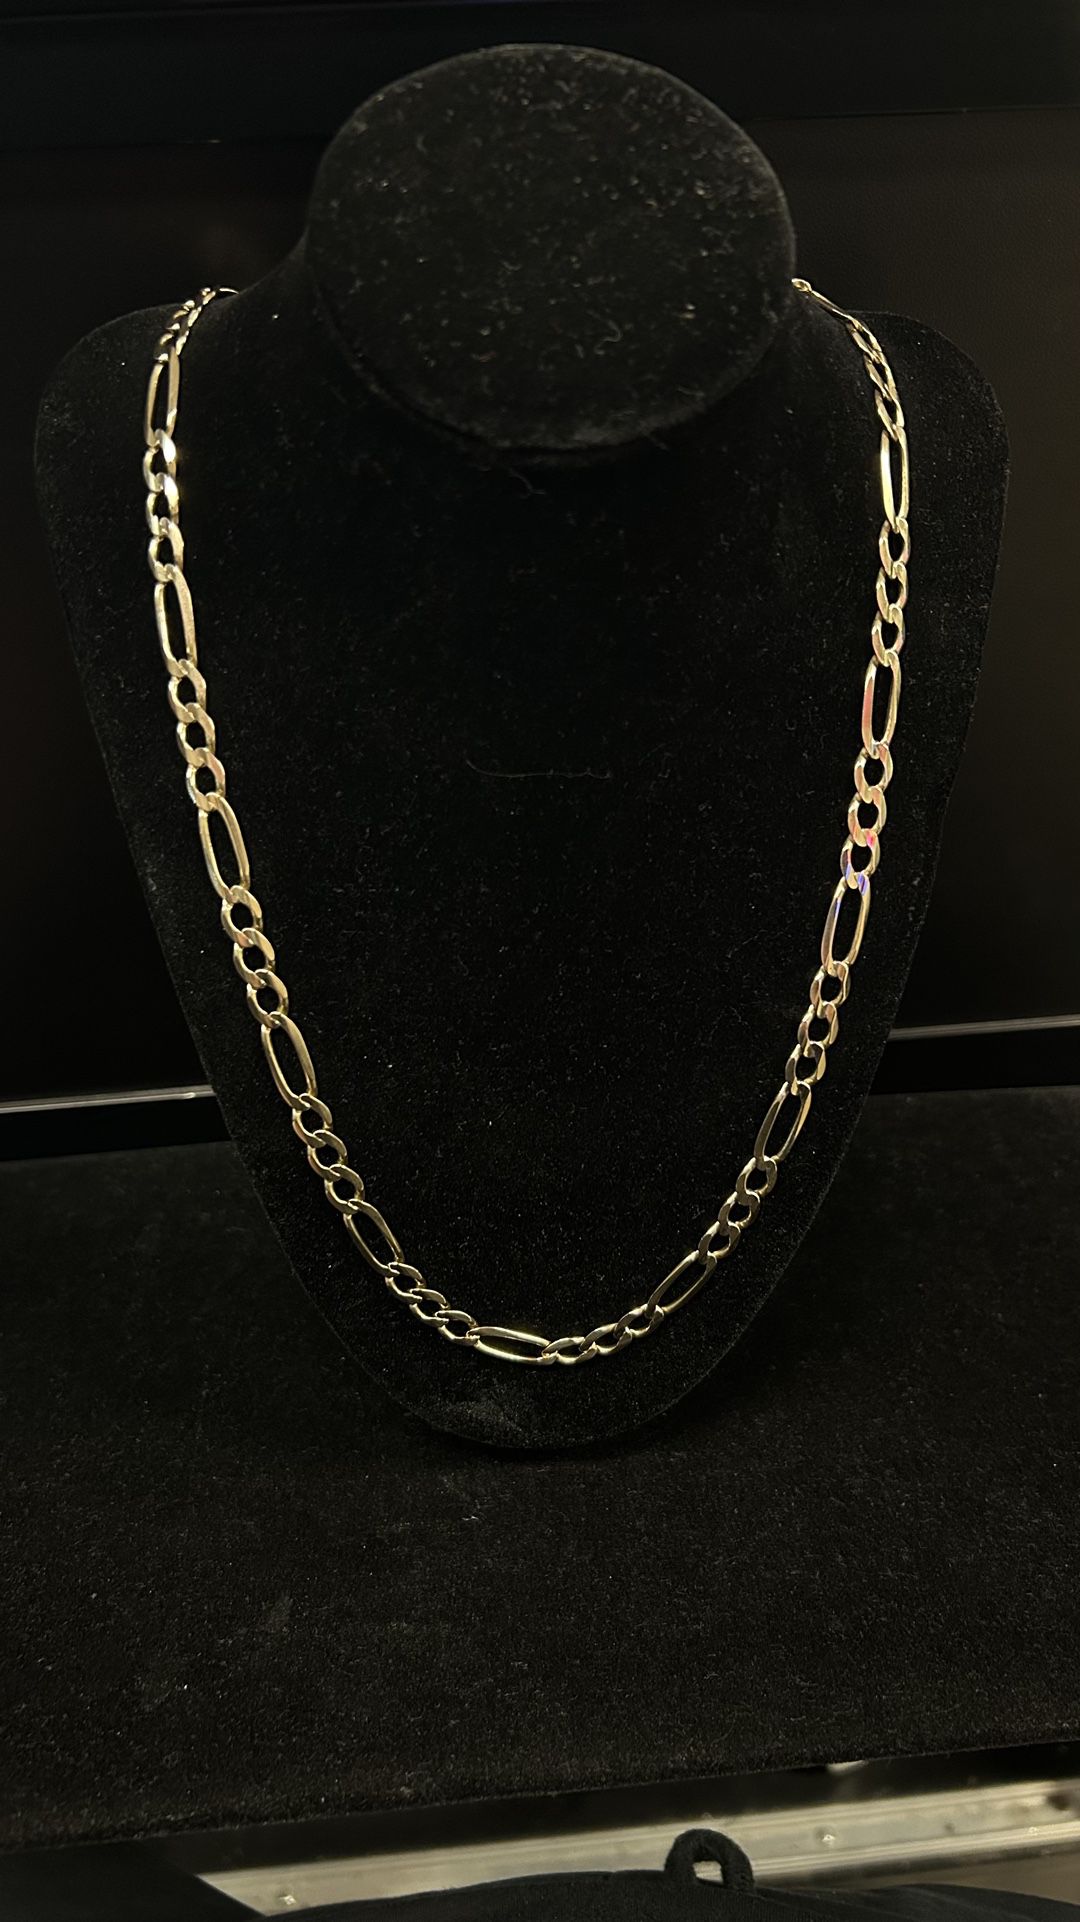 10K Gold Figuaro Neckalce 7mm wide 24”L 28.78grms no trades pick up in Tacoma 